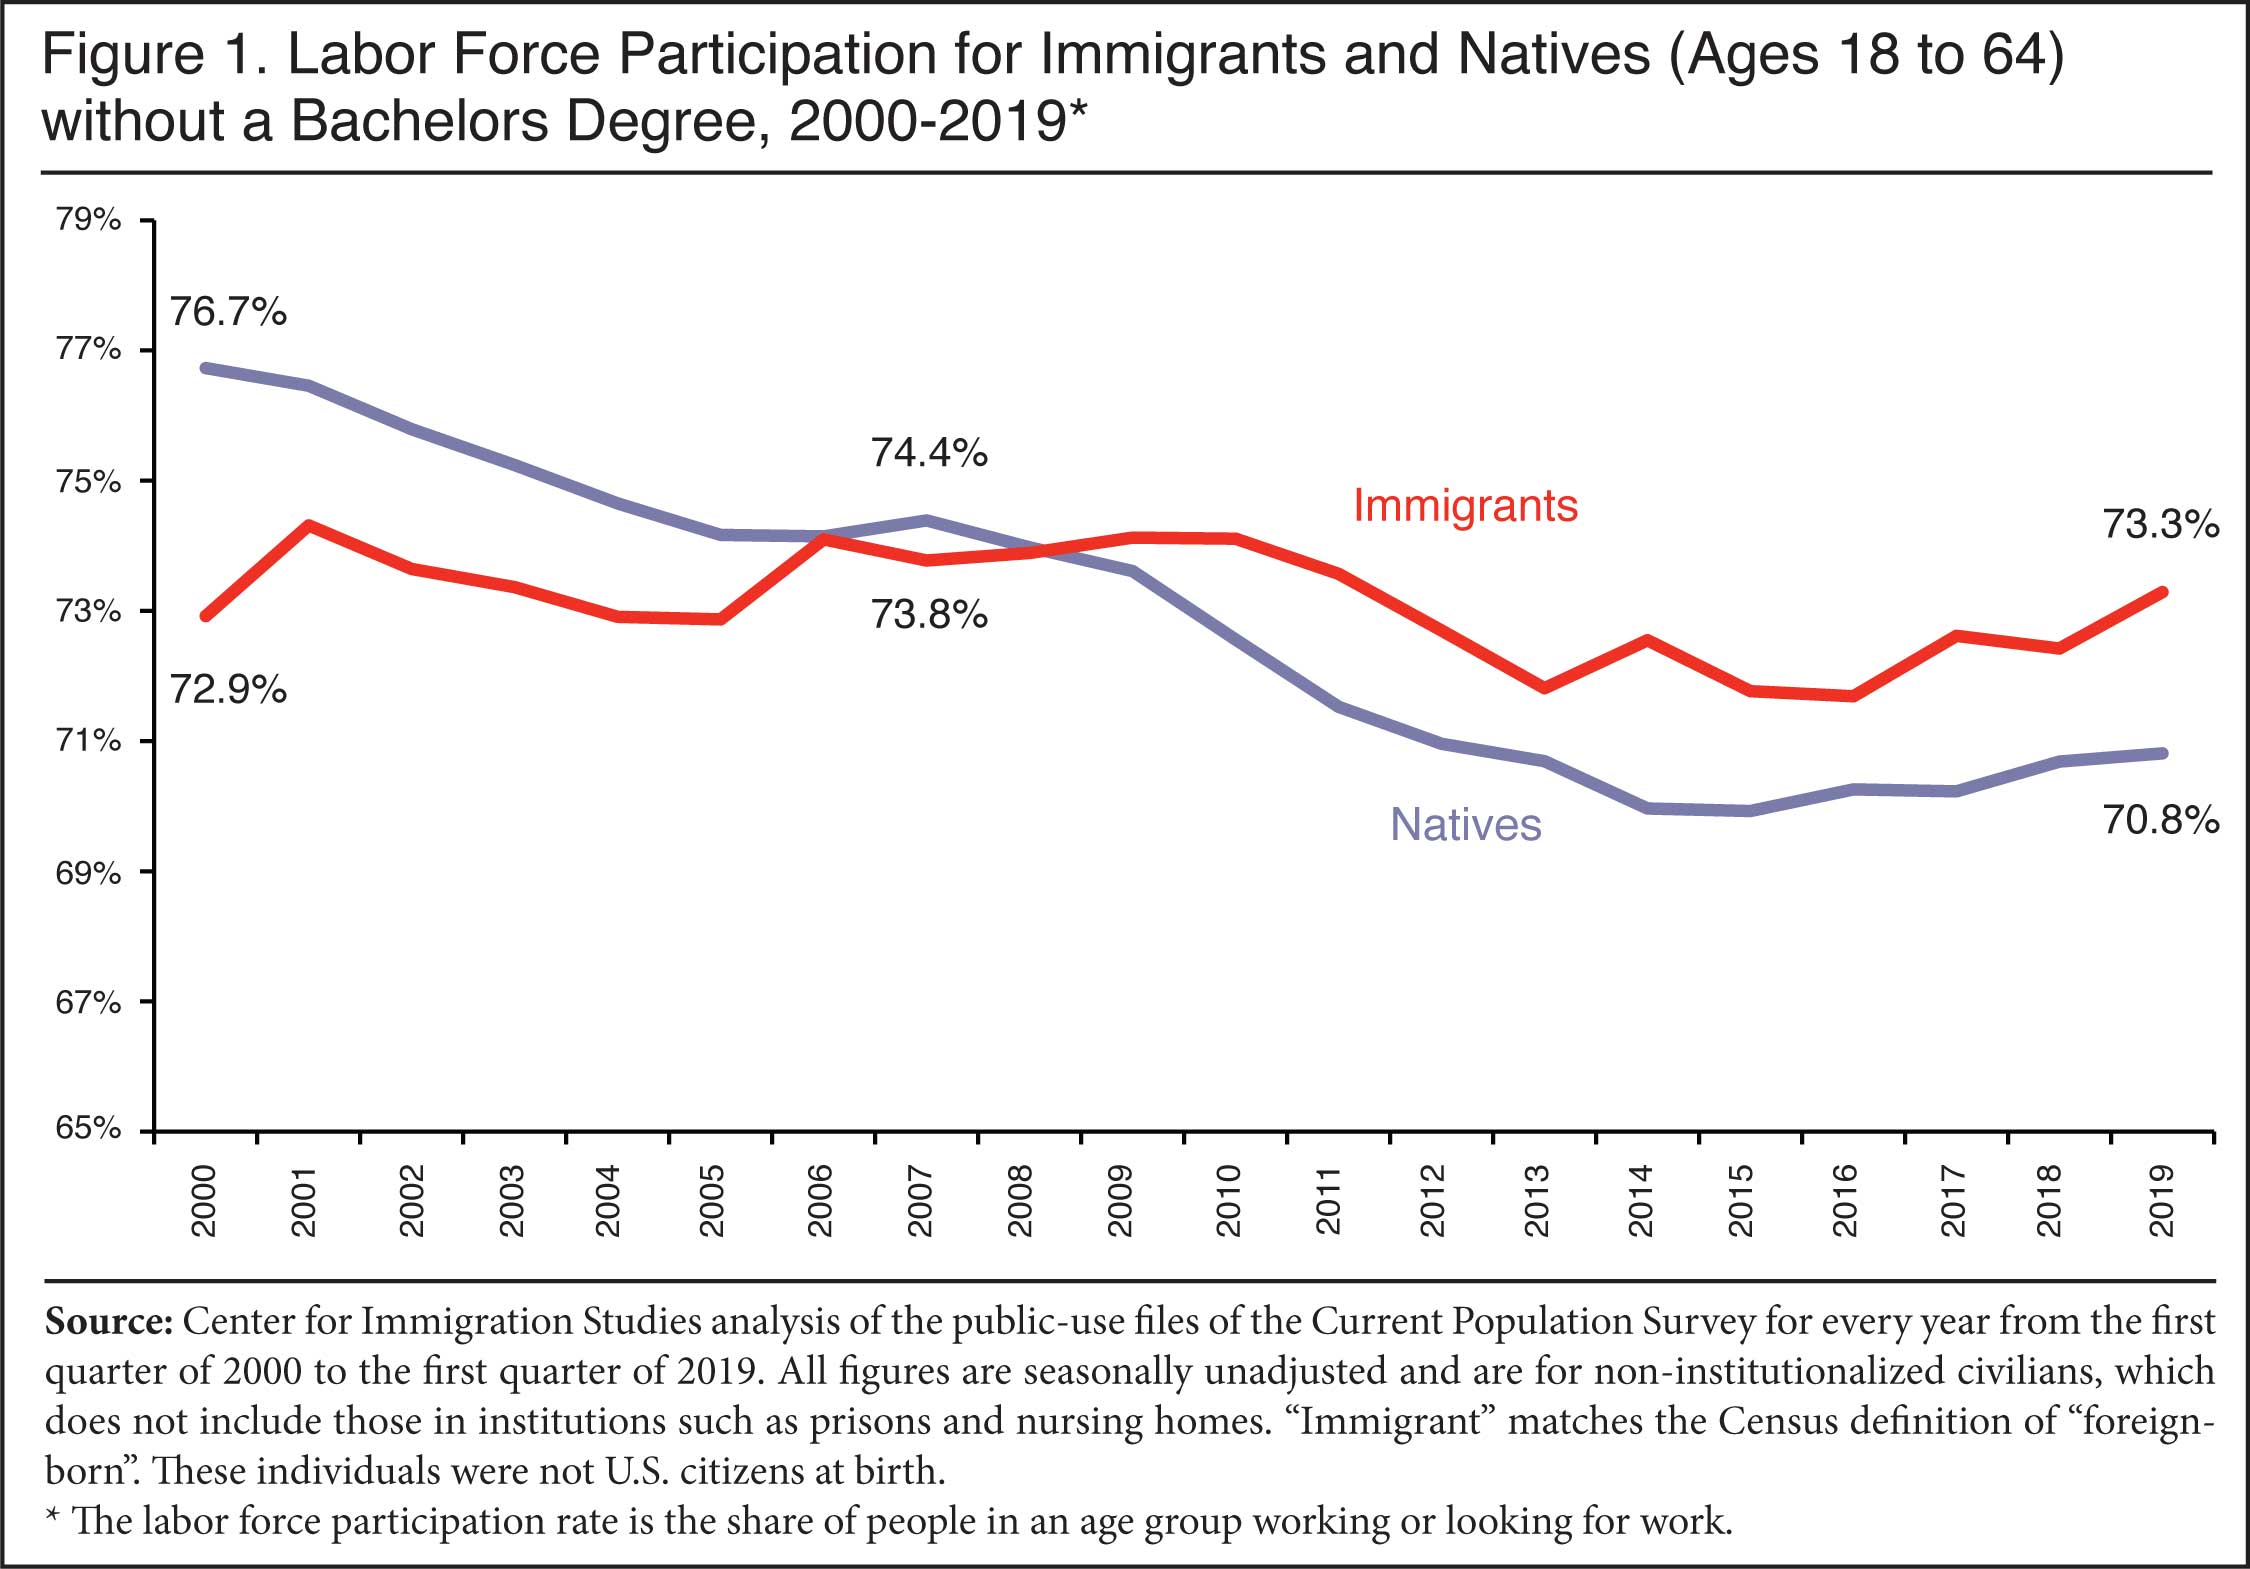 Graph: Labor Force Participation for Immigrants and Natives without a Bachelors Degree, 2000-2019